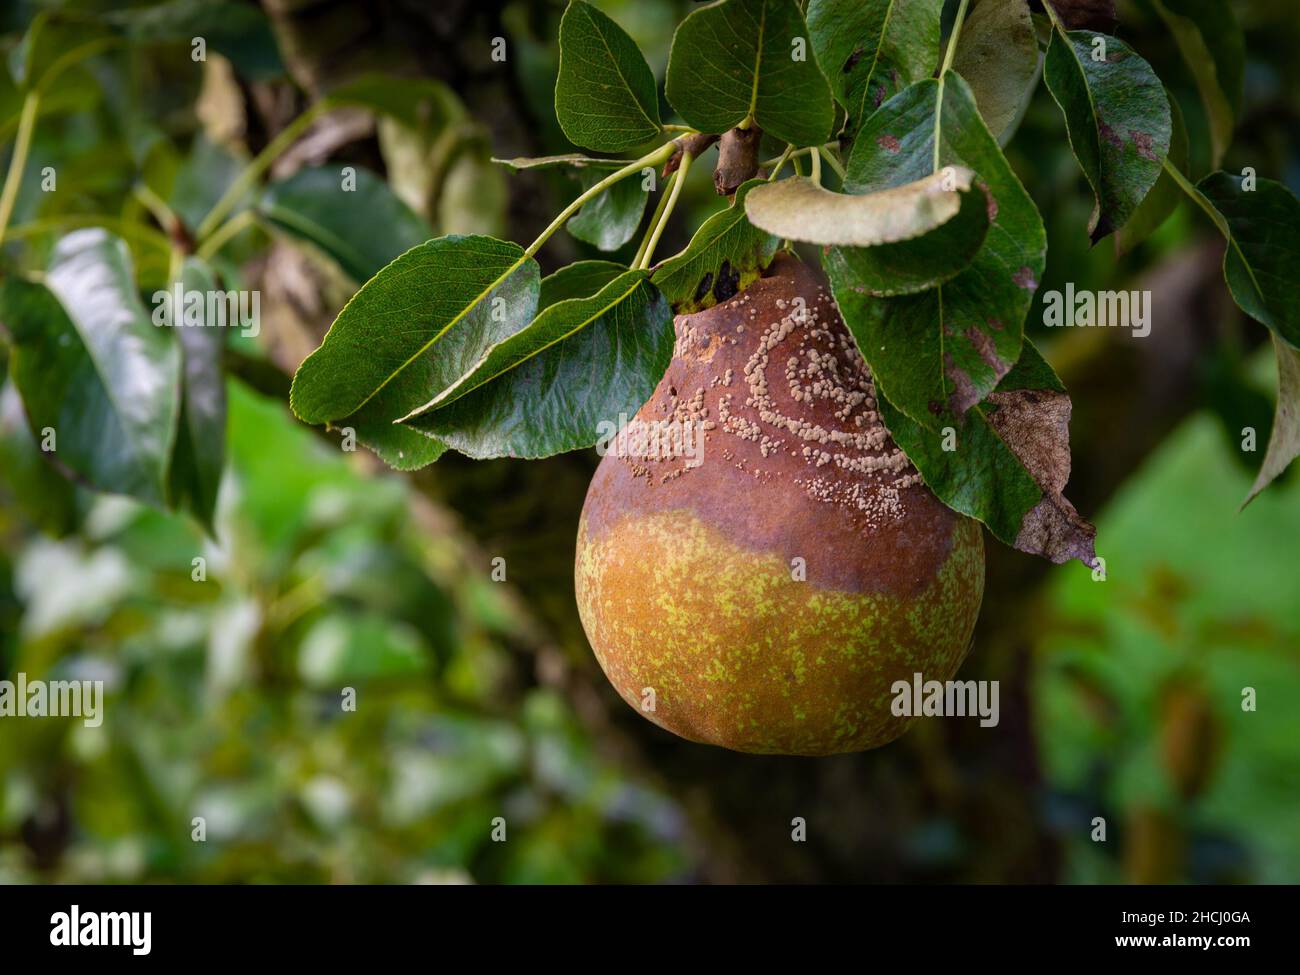 Detail of half rotten pear in the tree, pear infected by a fungus causing a brown rot Stock Photo